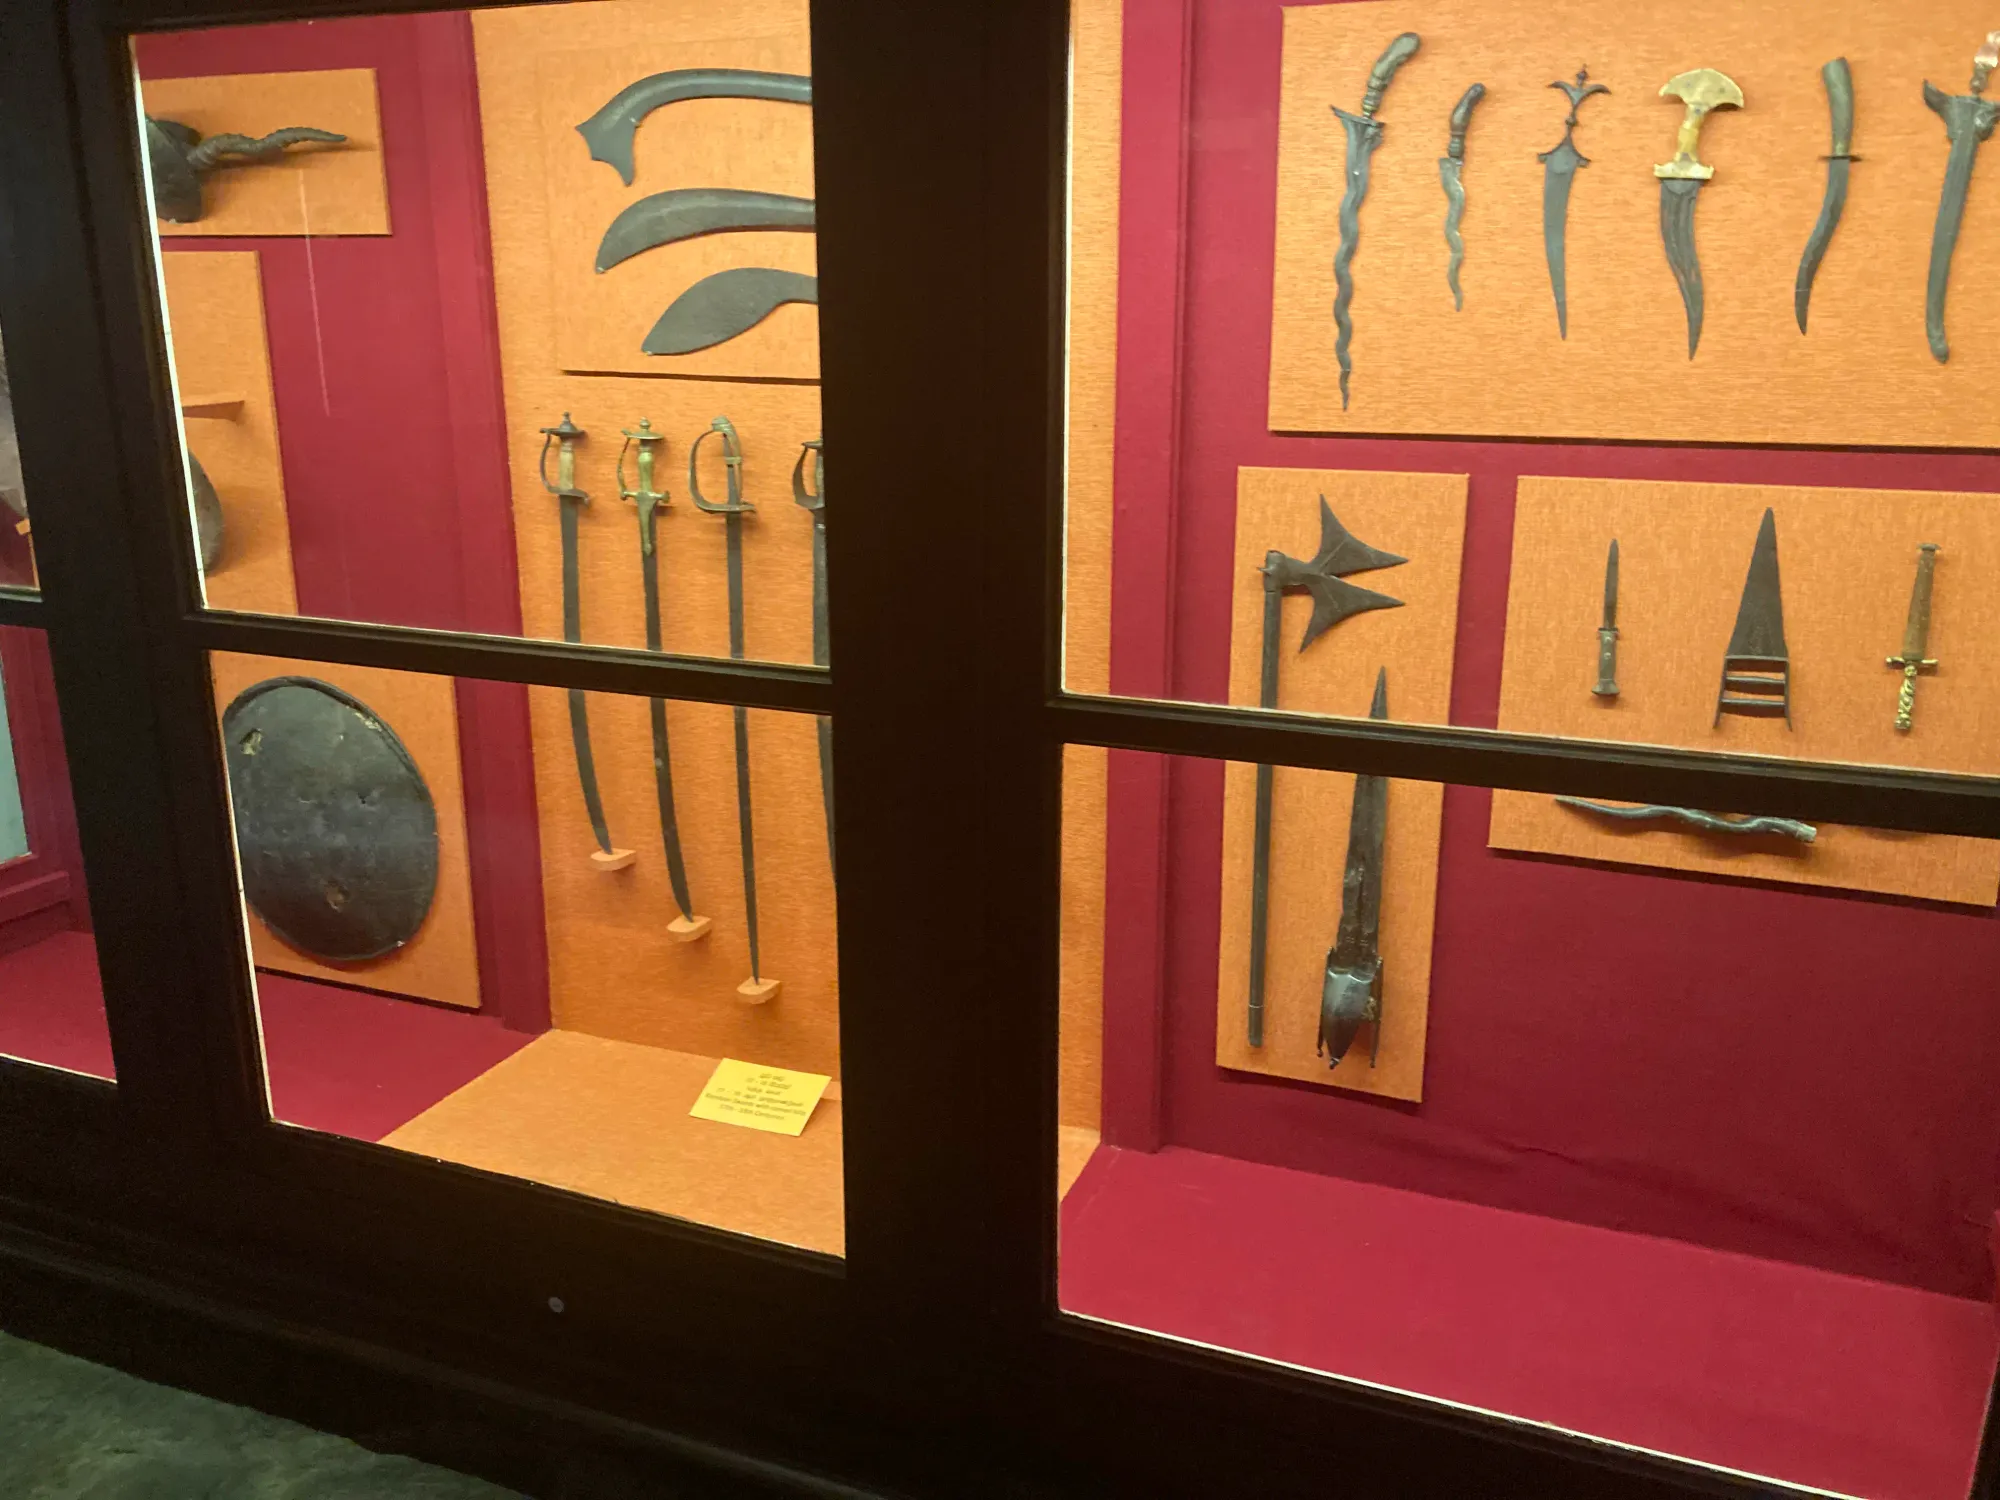 Bladed weapons displayed displayed at the Kandy National Museum, Sri Lanka